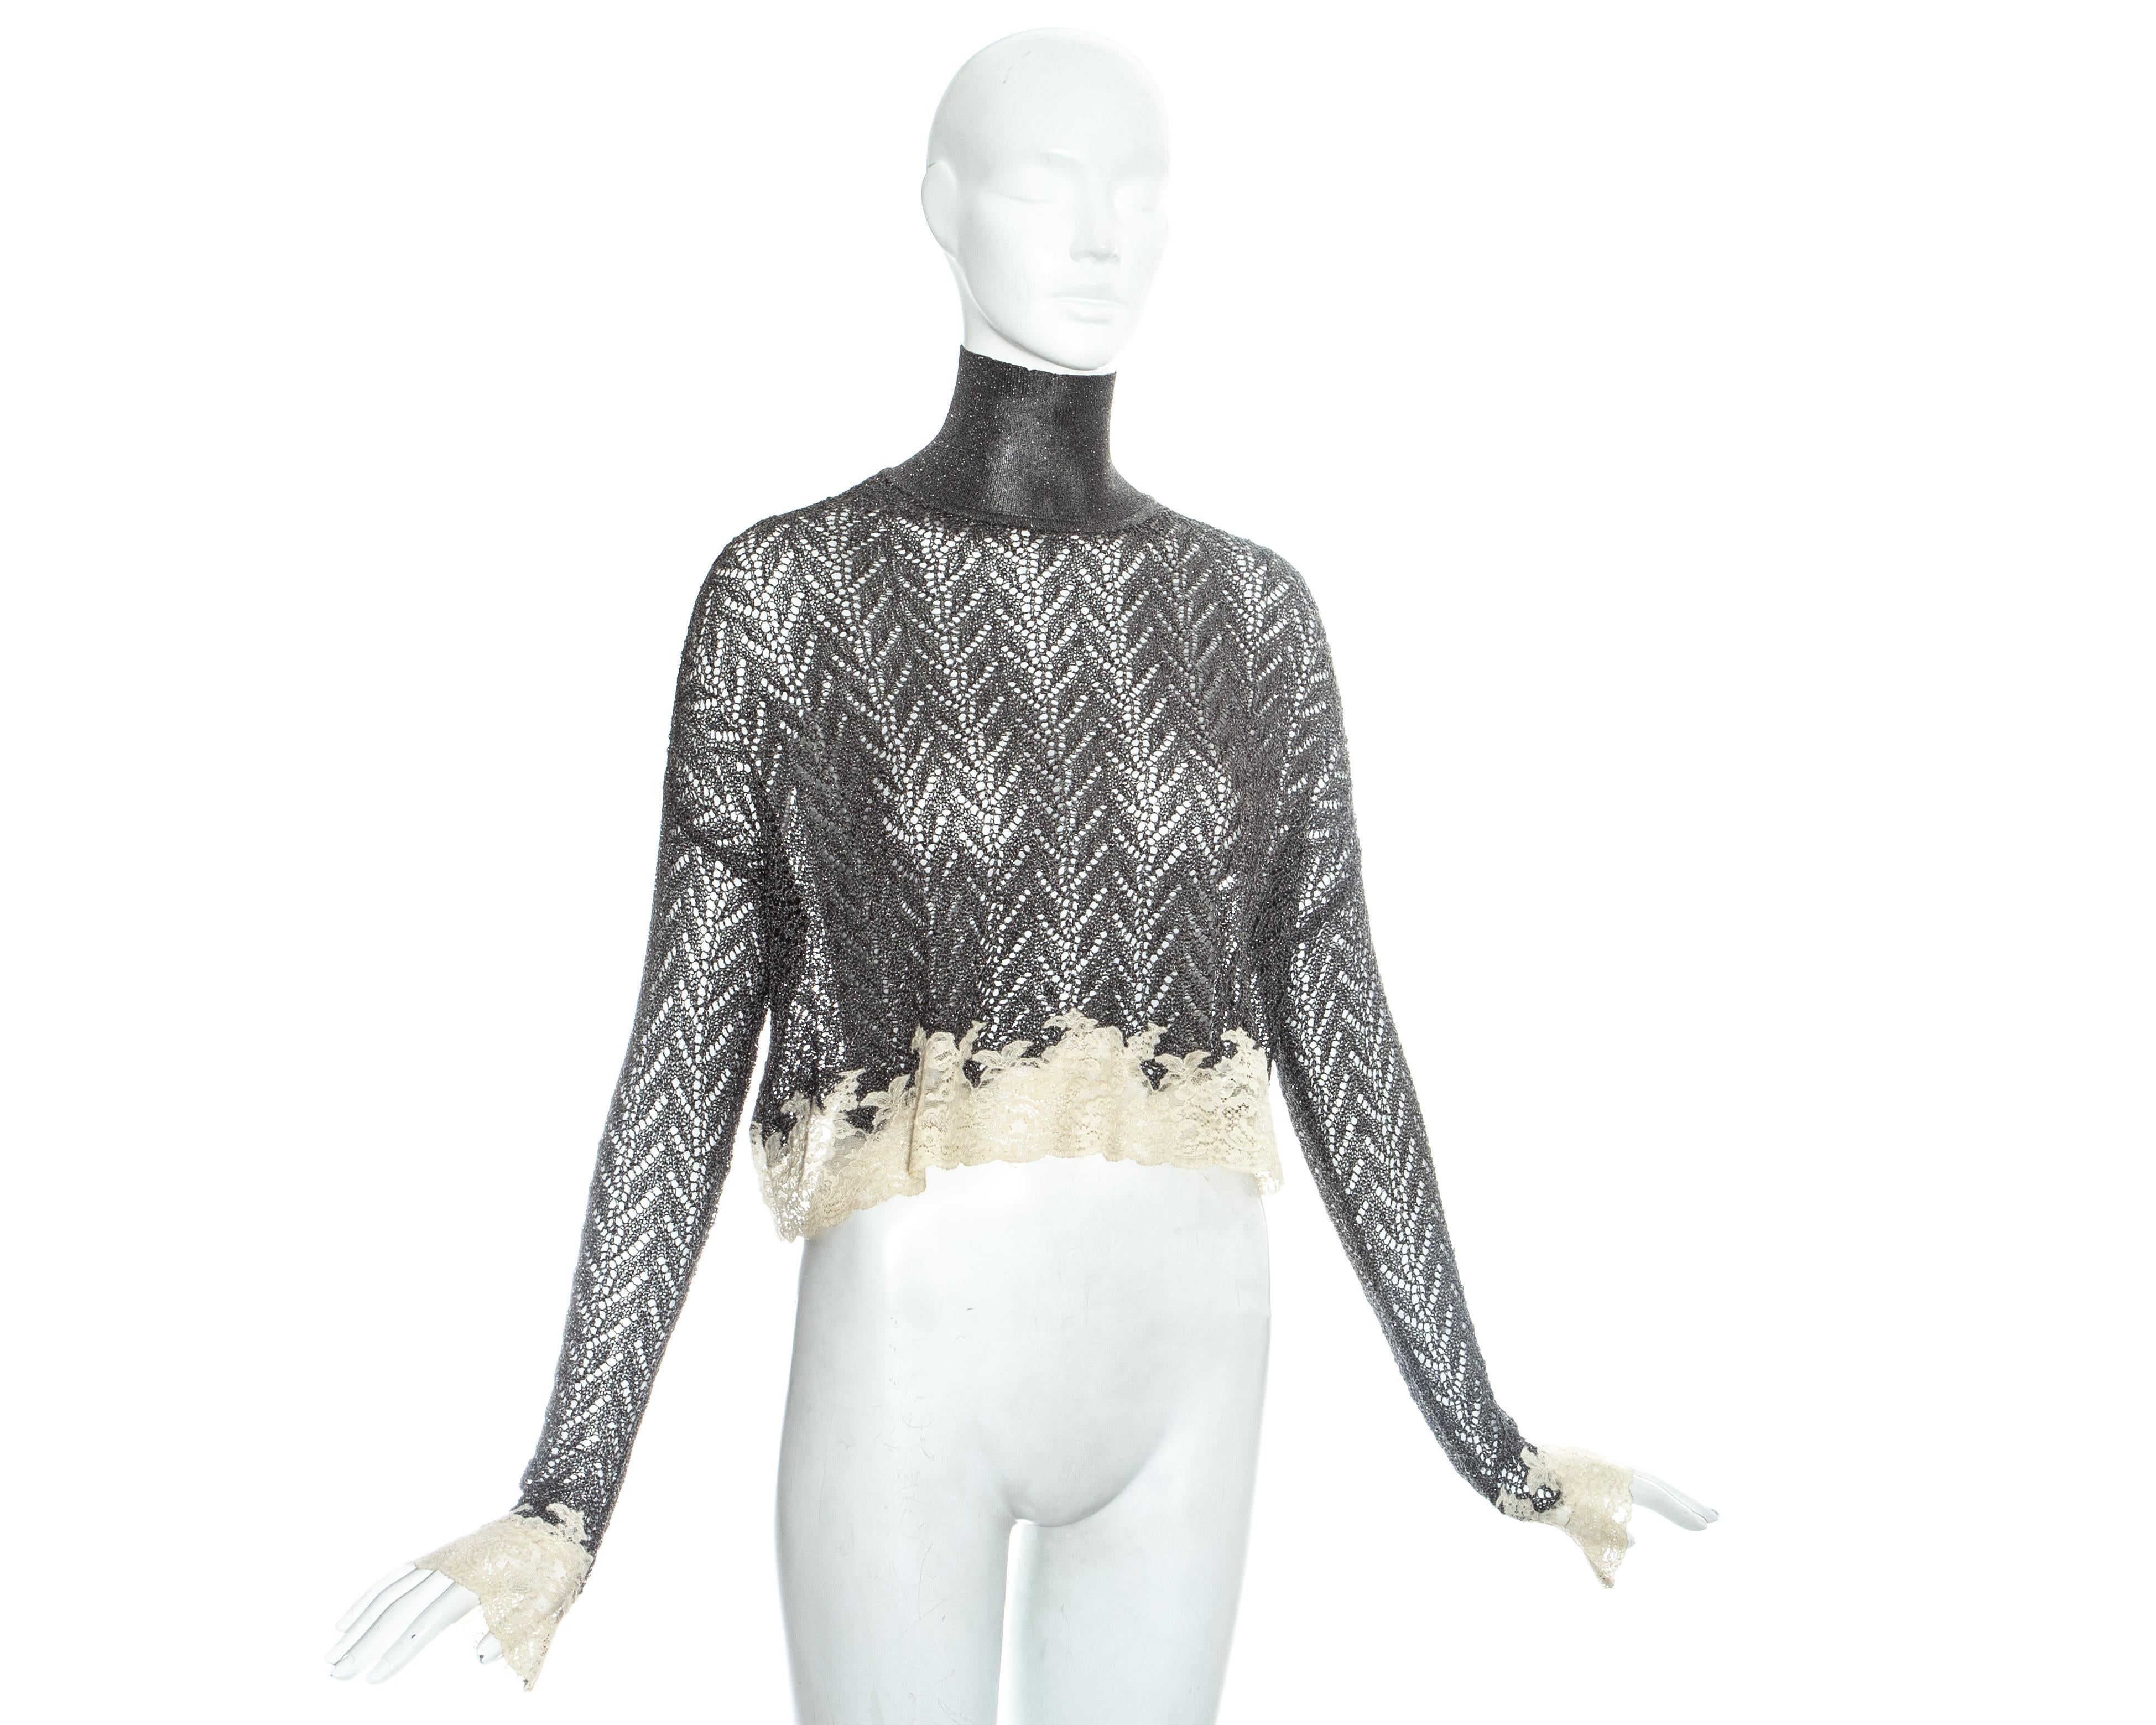 Christian Dior silver crochet knit wide cut turtle neck sweater with cream lace trim

Fall-Winter 1998